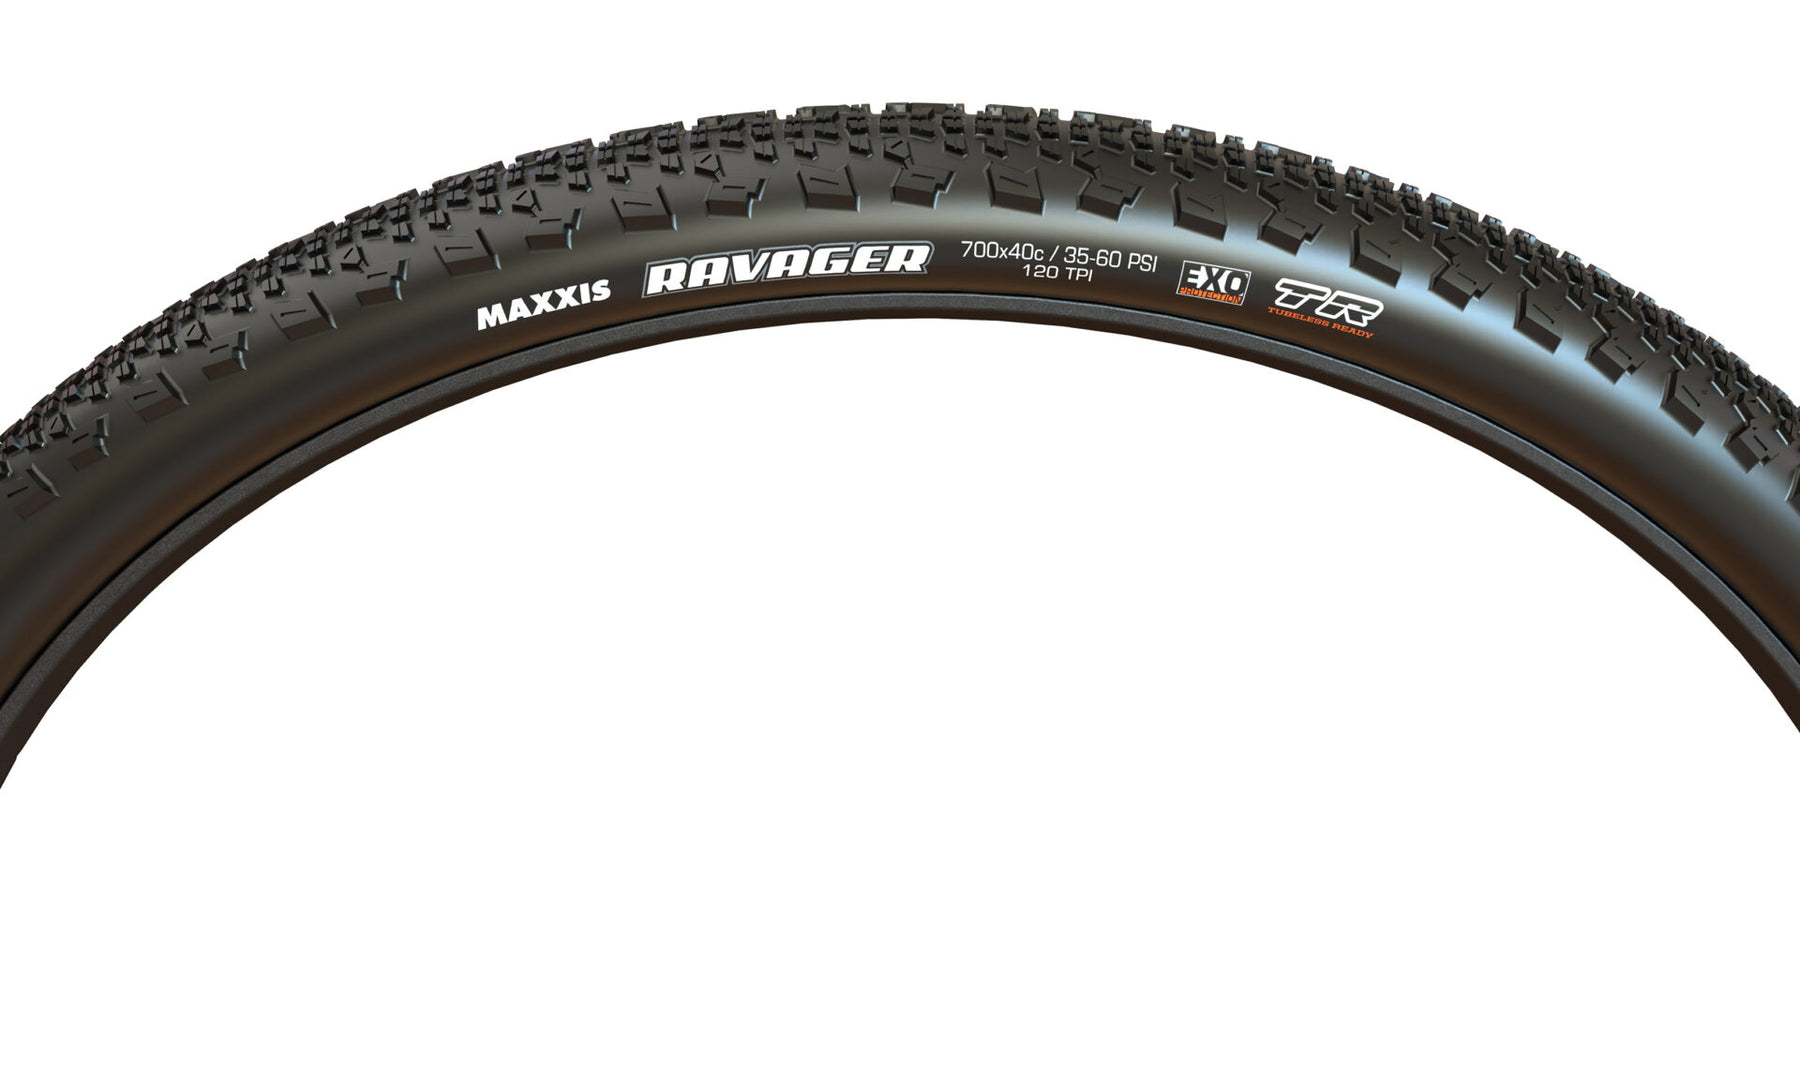 Maxxis Ravager Gravel Tyre